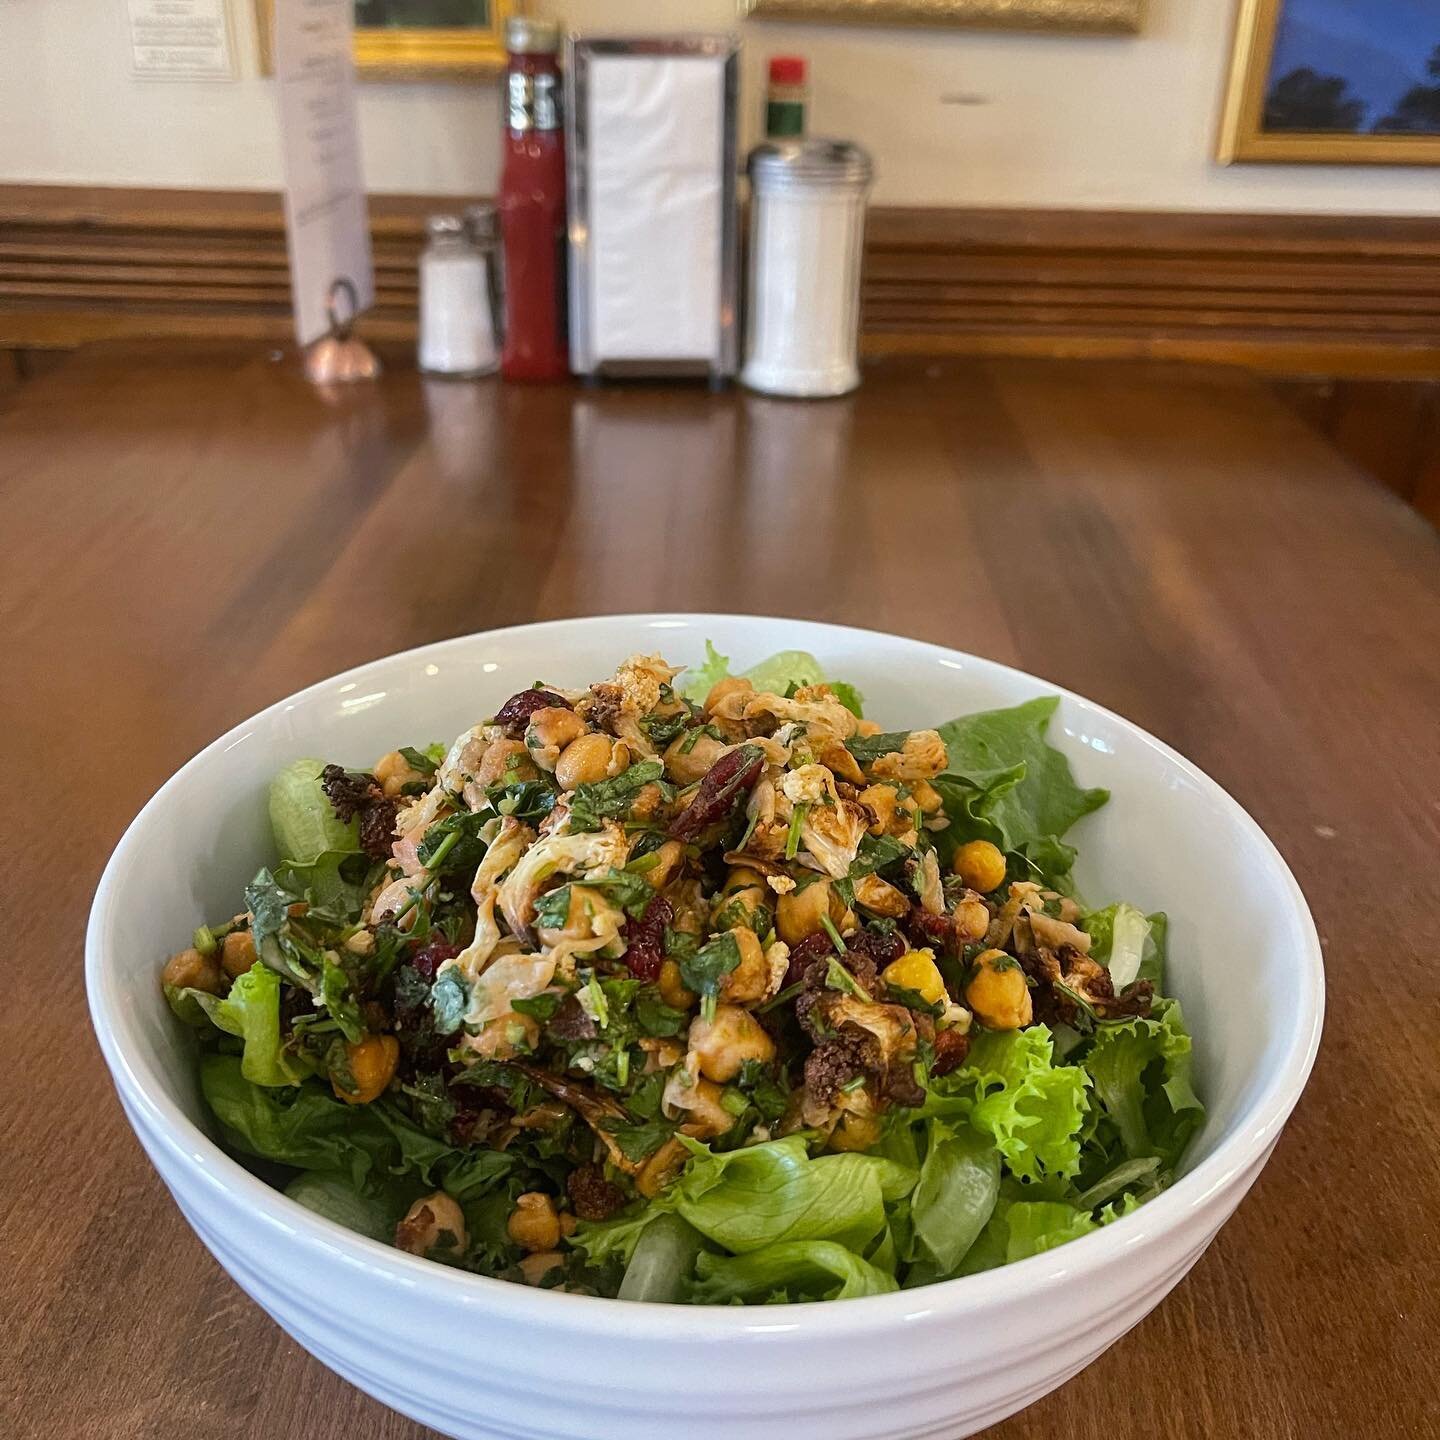 THIS WEEKENDS SPECIAL: Roasted Cauliflower &amp; Chickpea salad with cranberries, tossed in a citrus herb olive oil and served on a bed of spring mix. (GF/V) #rochestervt #rochestercafe #homemadegoodness